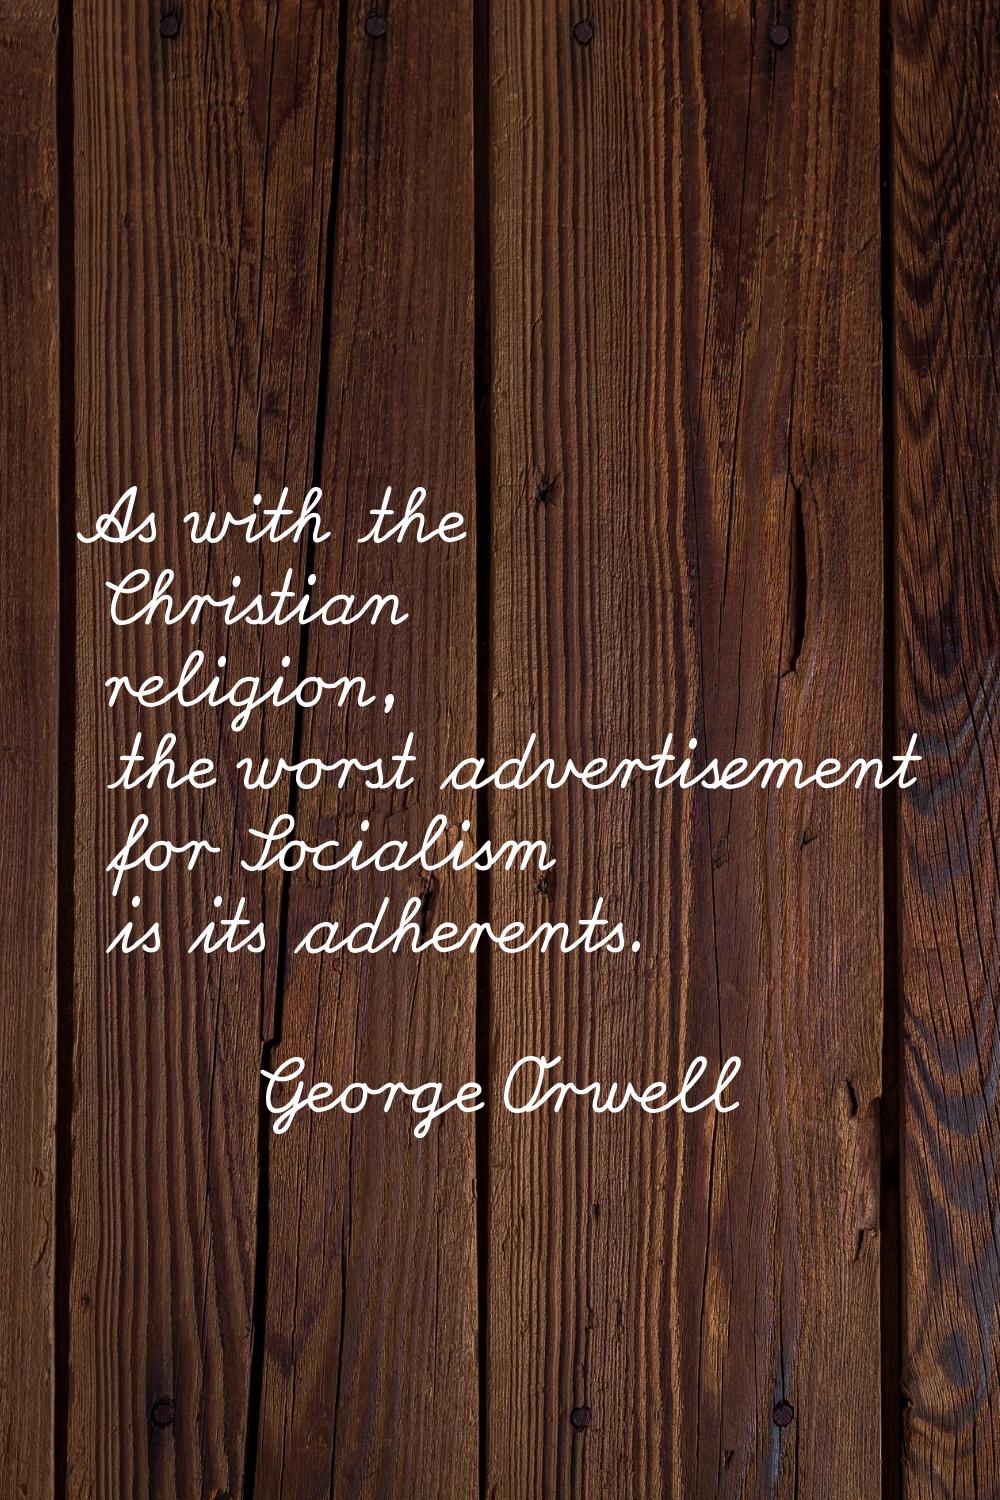 As with the Christian religion, the worst advertisement for Socialism is its adherents.